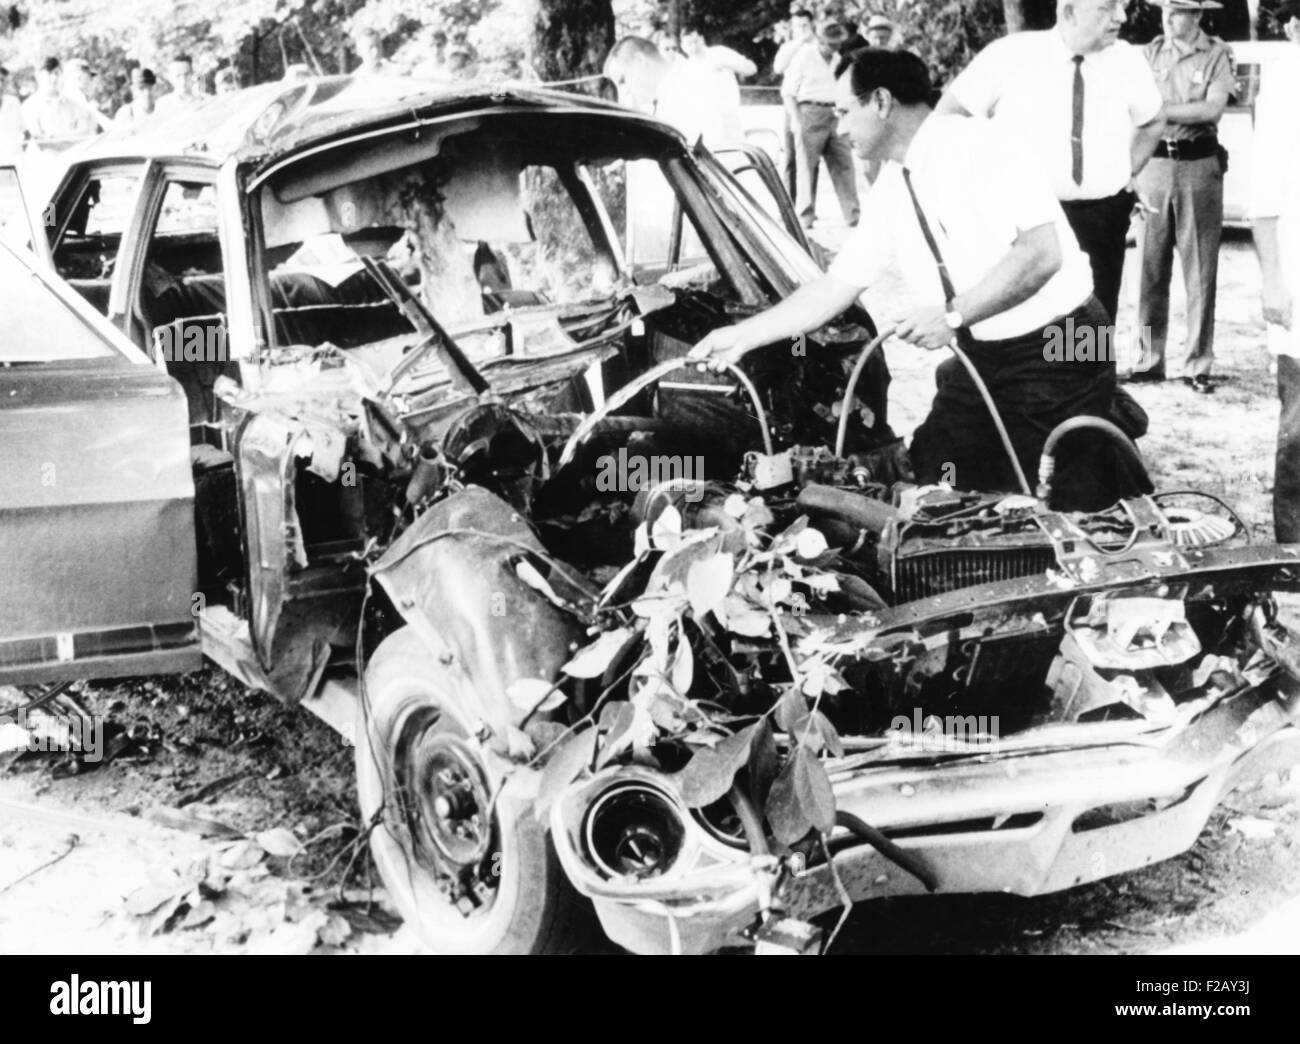 Bomb wrecked remains of car of Jackson County Solicitor, Floyd Hord, who was killed. Jefferson, Georgia, Aug. 7, 1967. The killers were group of bootleggers, upset by the seizure of $20,000 worth of illicit booze in A.C. Cliff Park's warehouse. Park and three others paid $5,000 to the murderer, and were later arrested, prosecuted, and imprisoned. (CSU 2015 9 882) Stock Photo